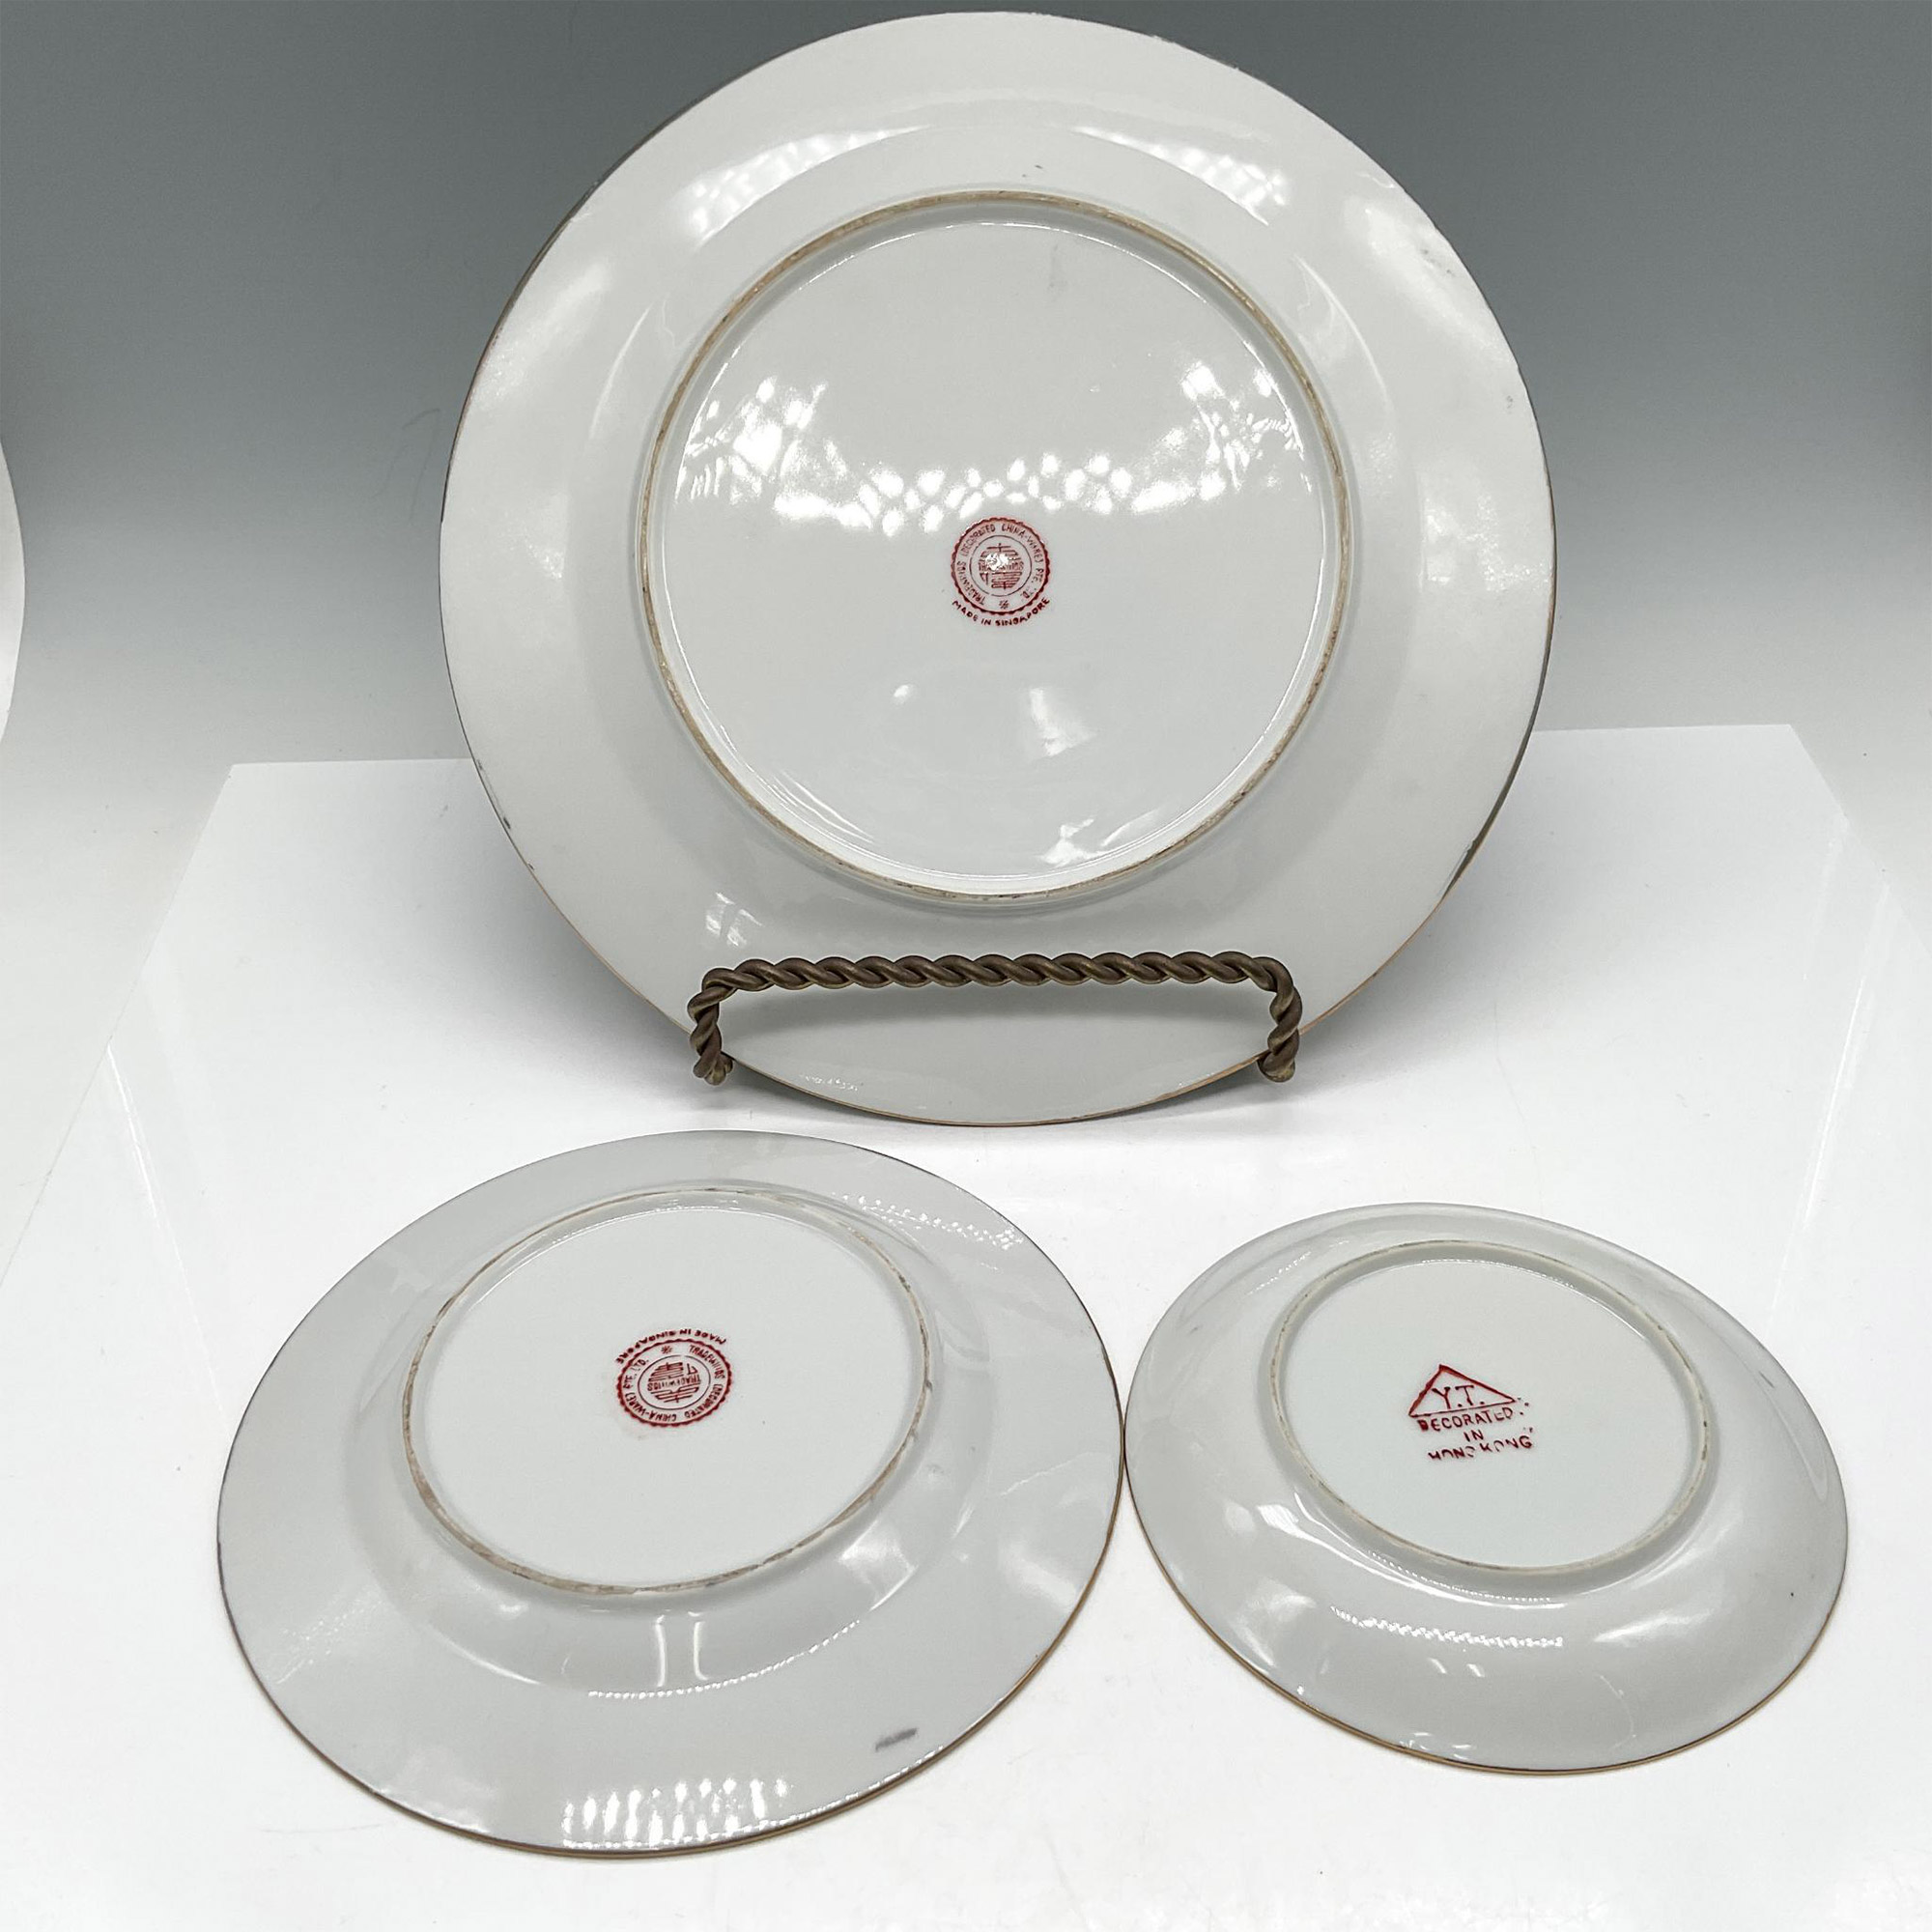 4pc Japanese Porcelain Server Ware, Rooster - Image 4 of 5